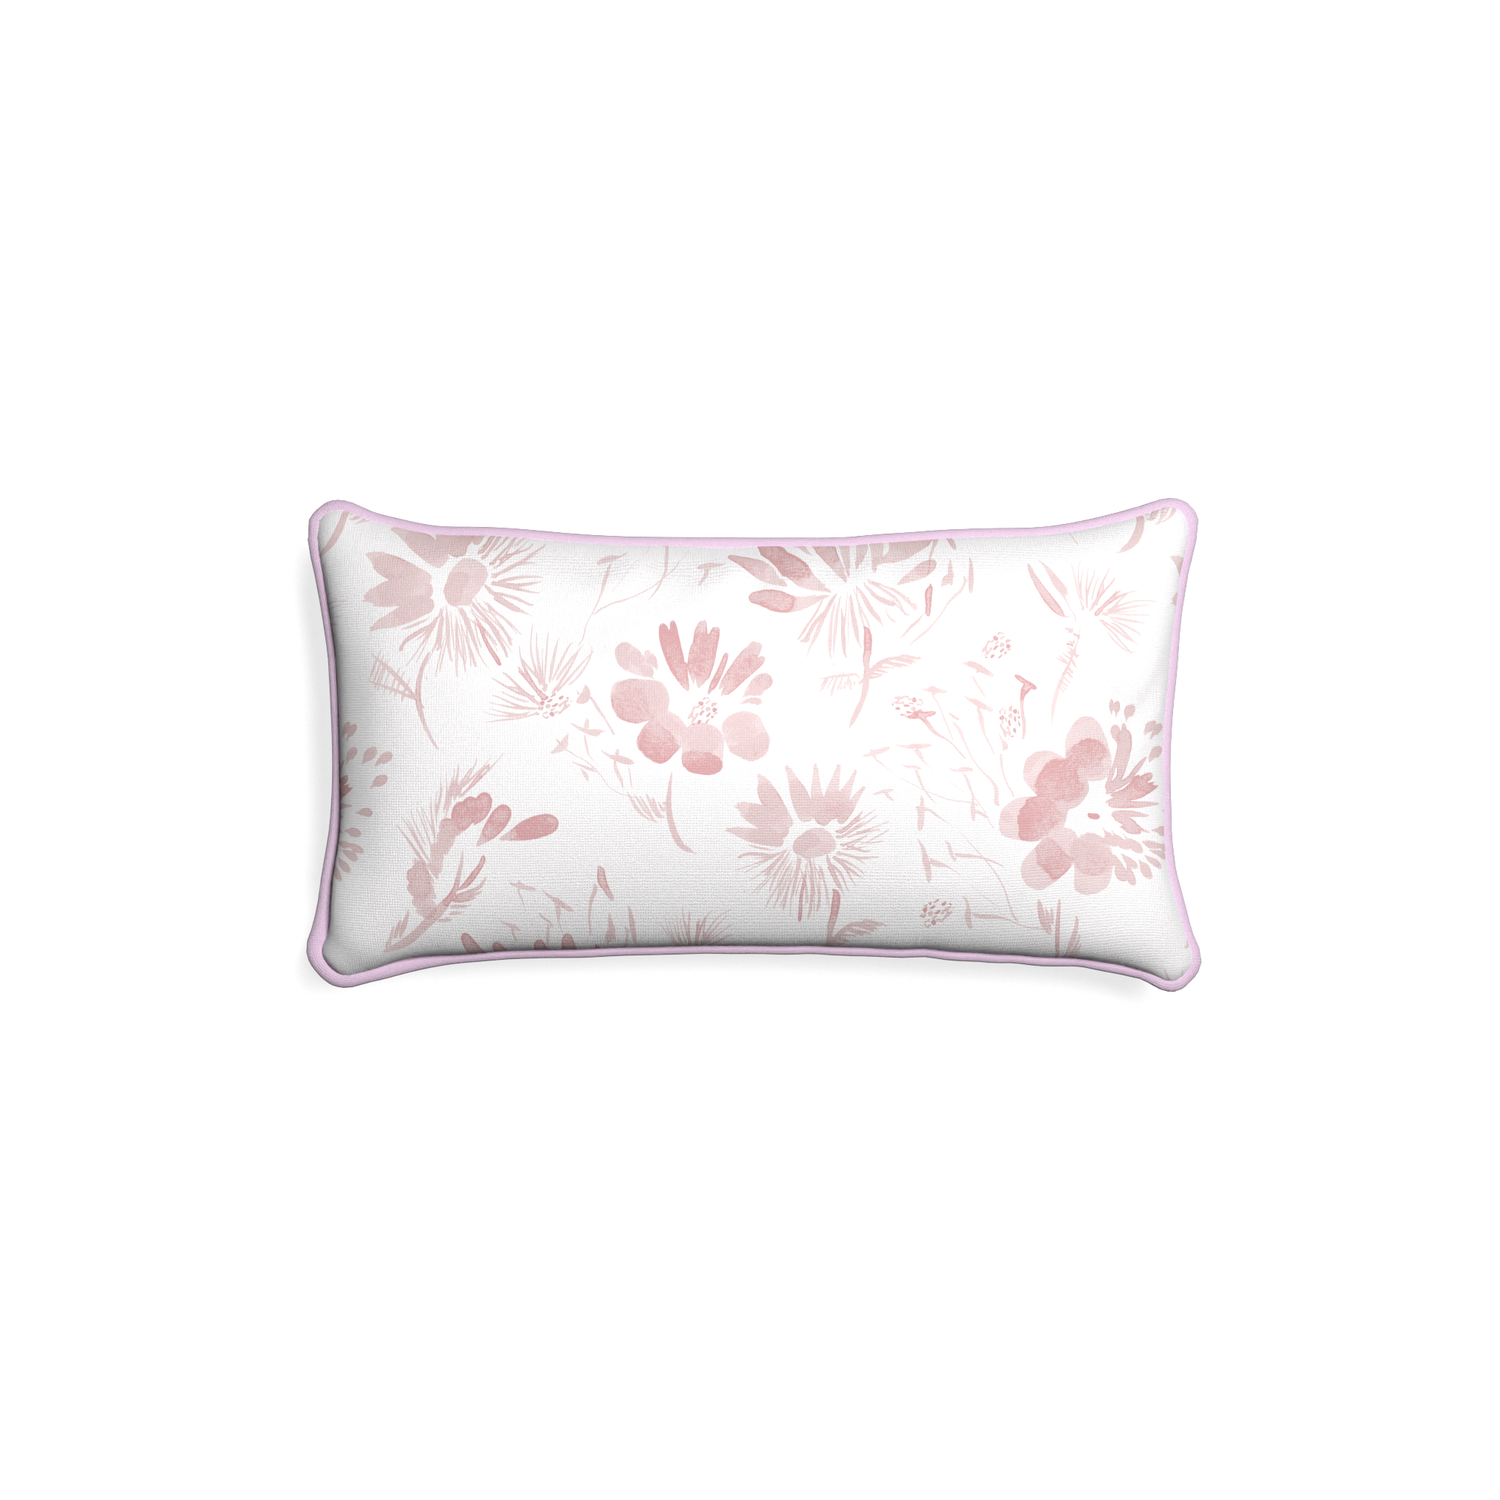 Petite-lumbar blake custom pink floralpillow with l piping on white background